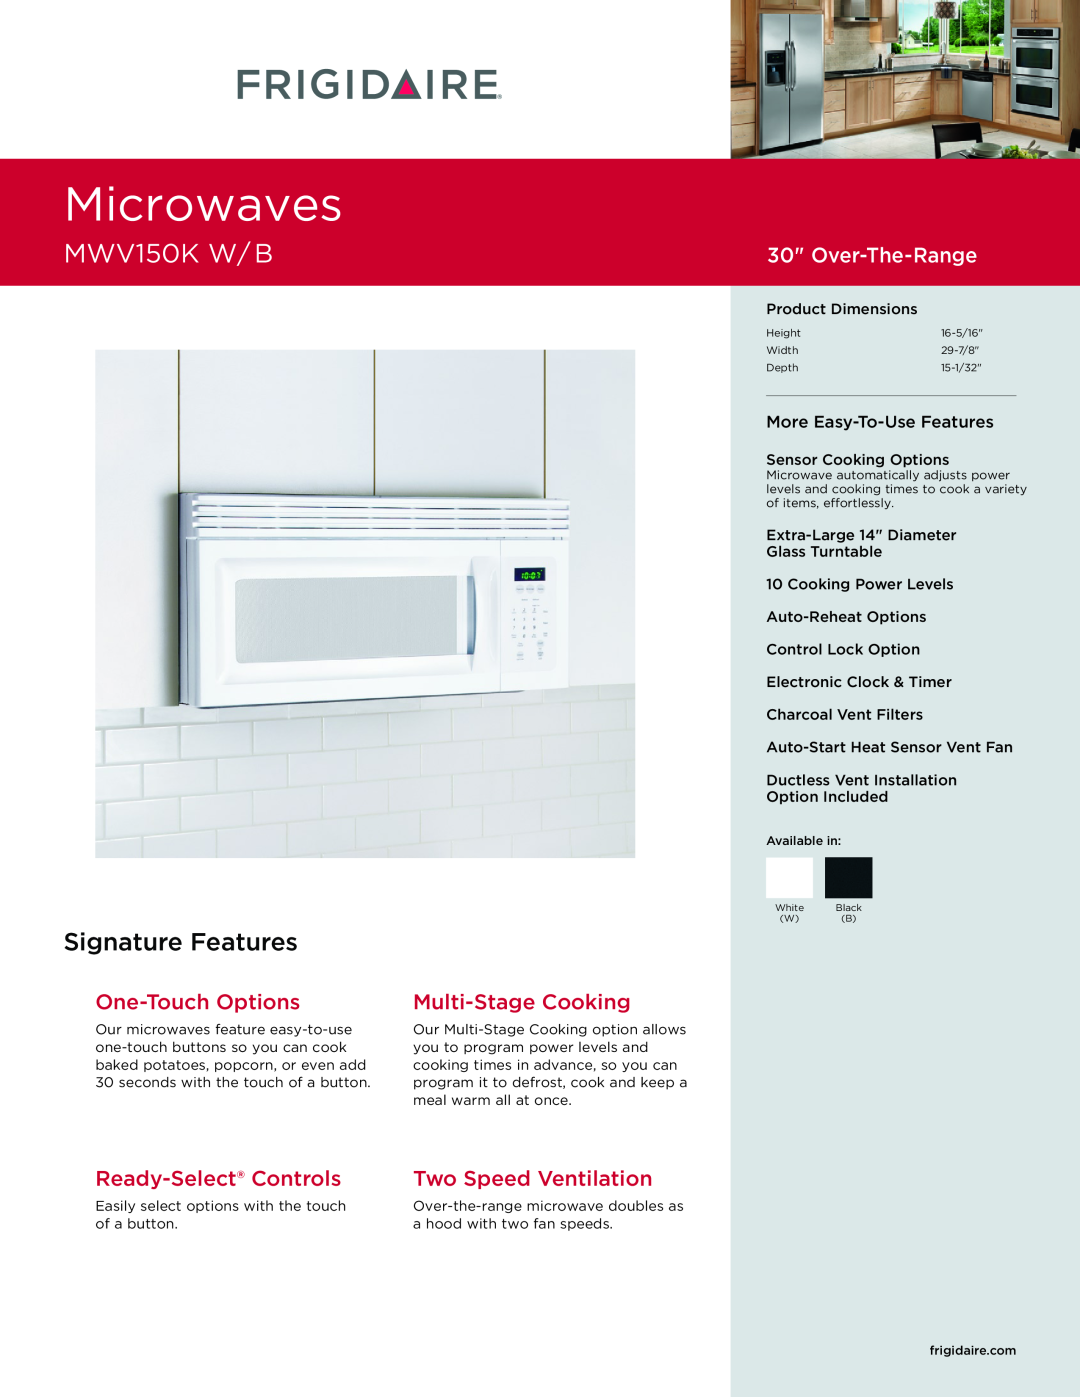 Frigidaire MWV150K W/B dimensions MicrowavesDrop-In Cooktop, MWV150KFPEC3085KW/S B, Signature Features, One-Touch Options 